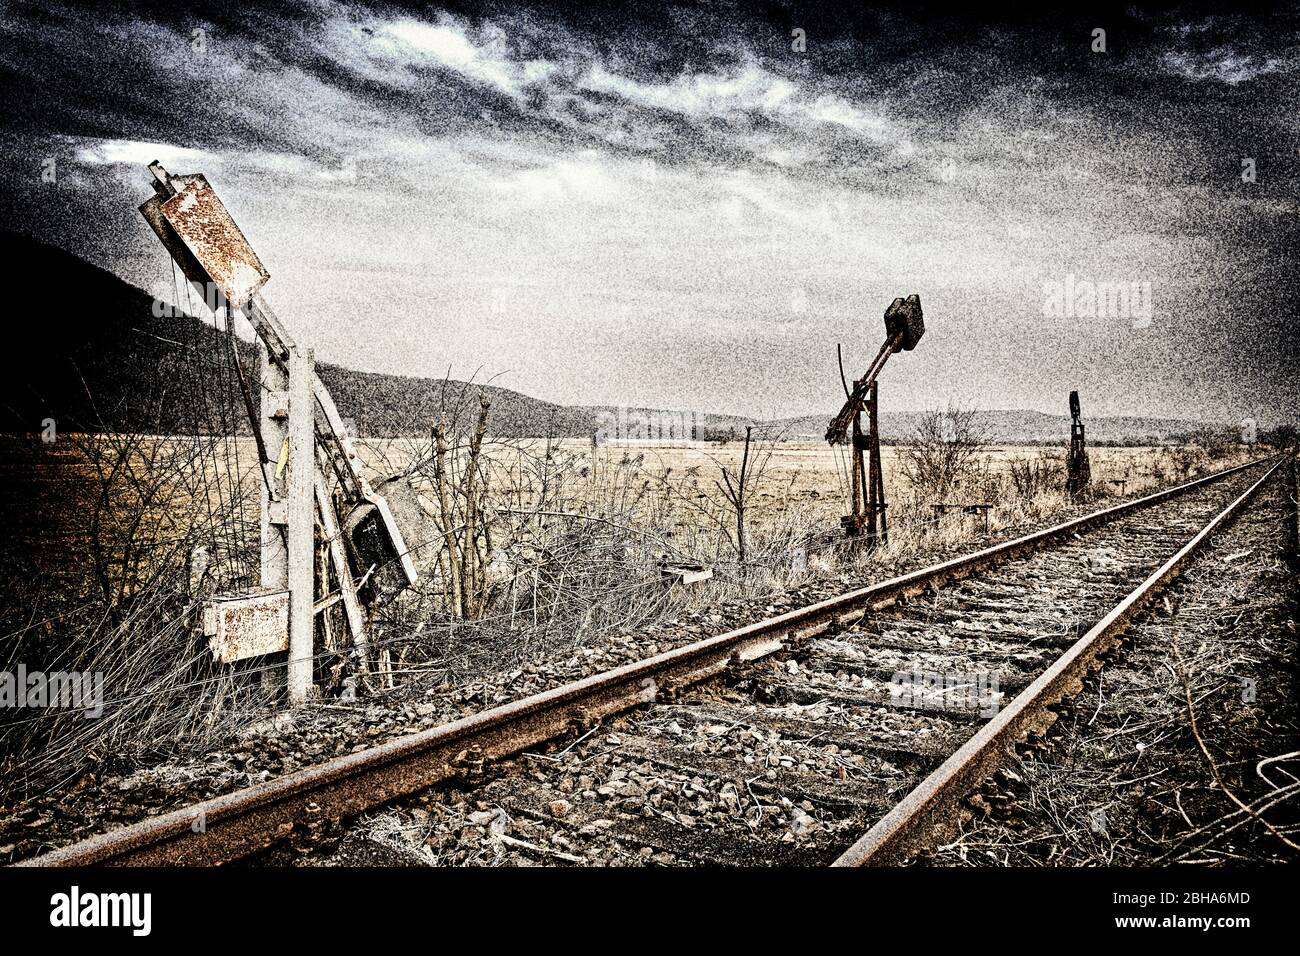 Track, Clamps out of service, digitally processed, RailArt Stock Photo